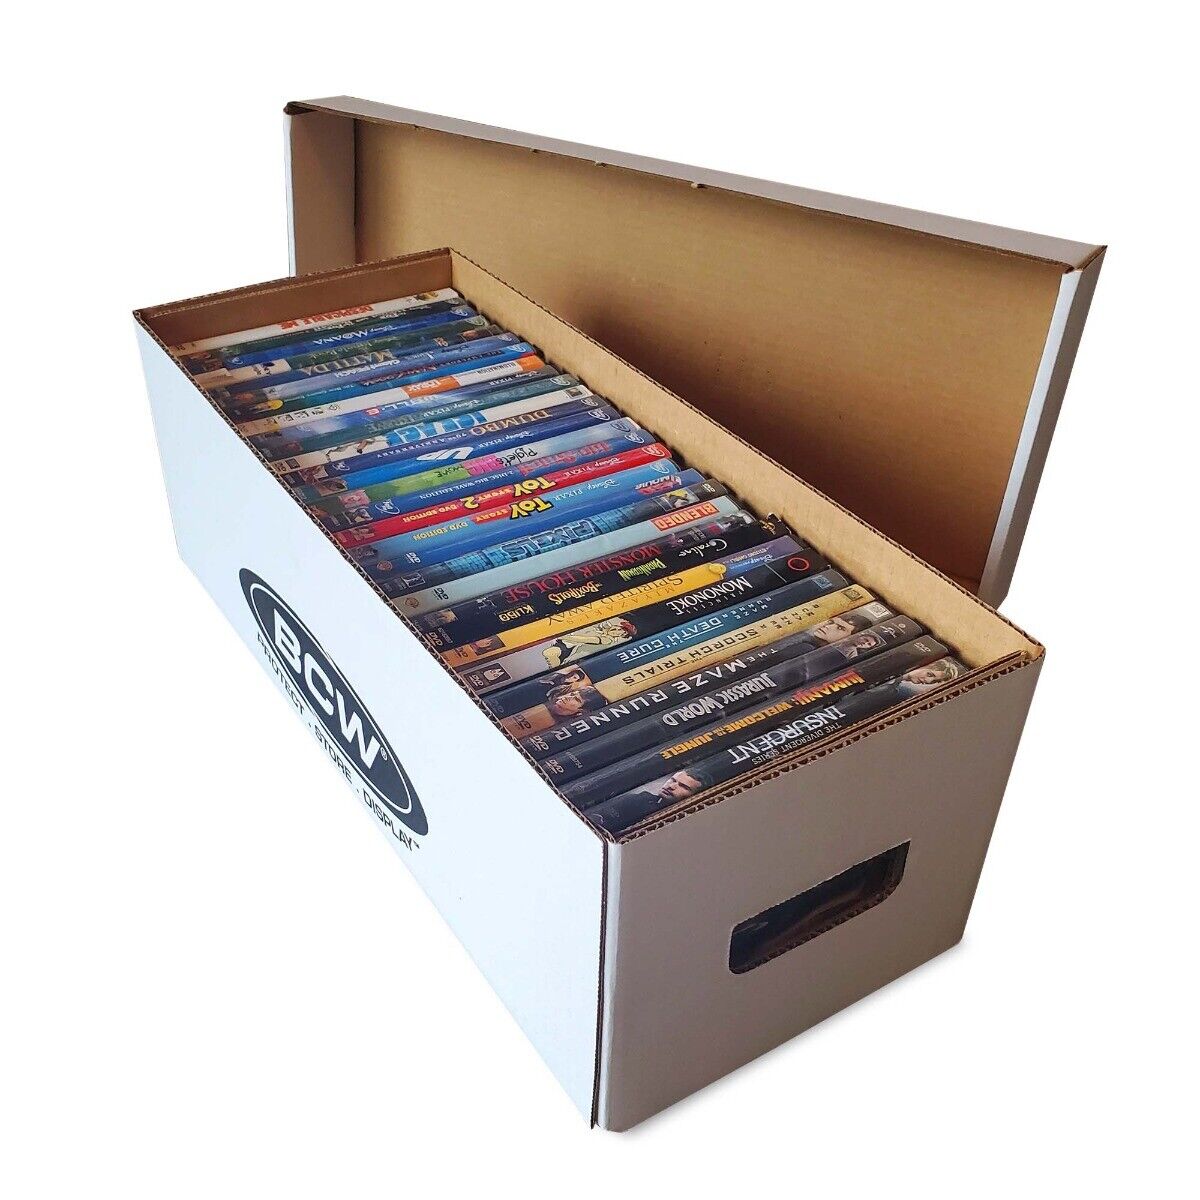 LOT OF 10 Boxes - DVD Manga Video Game Media Stackable BCW Cardboard Storage Box